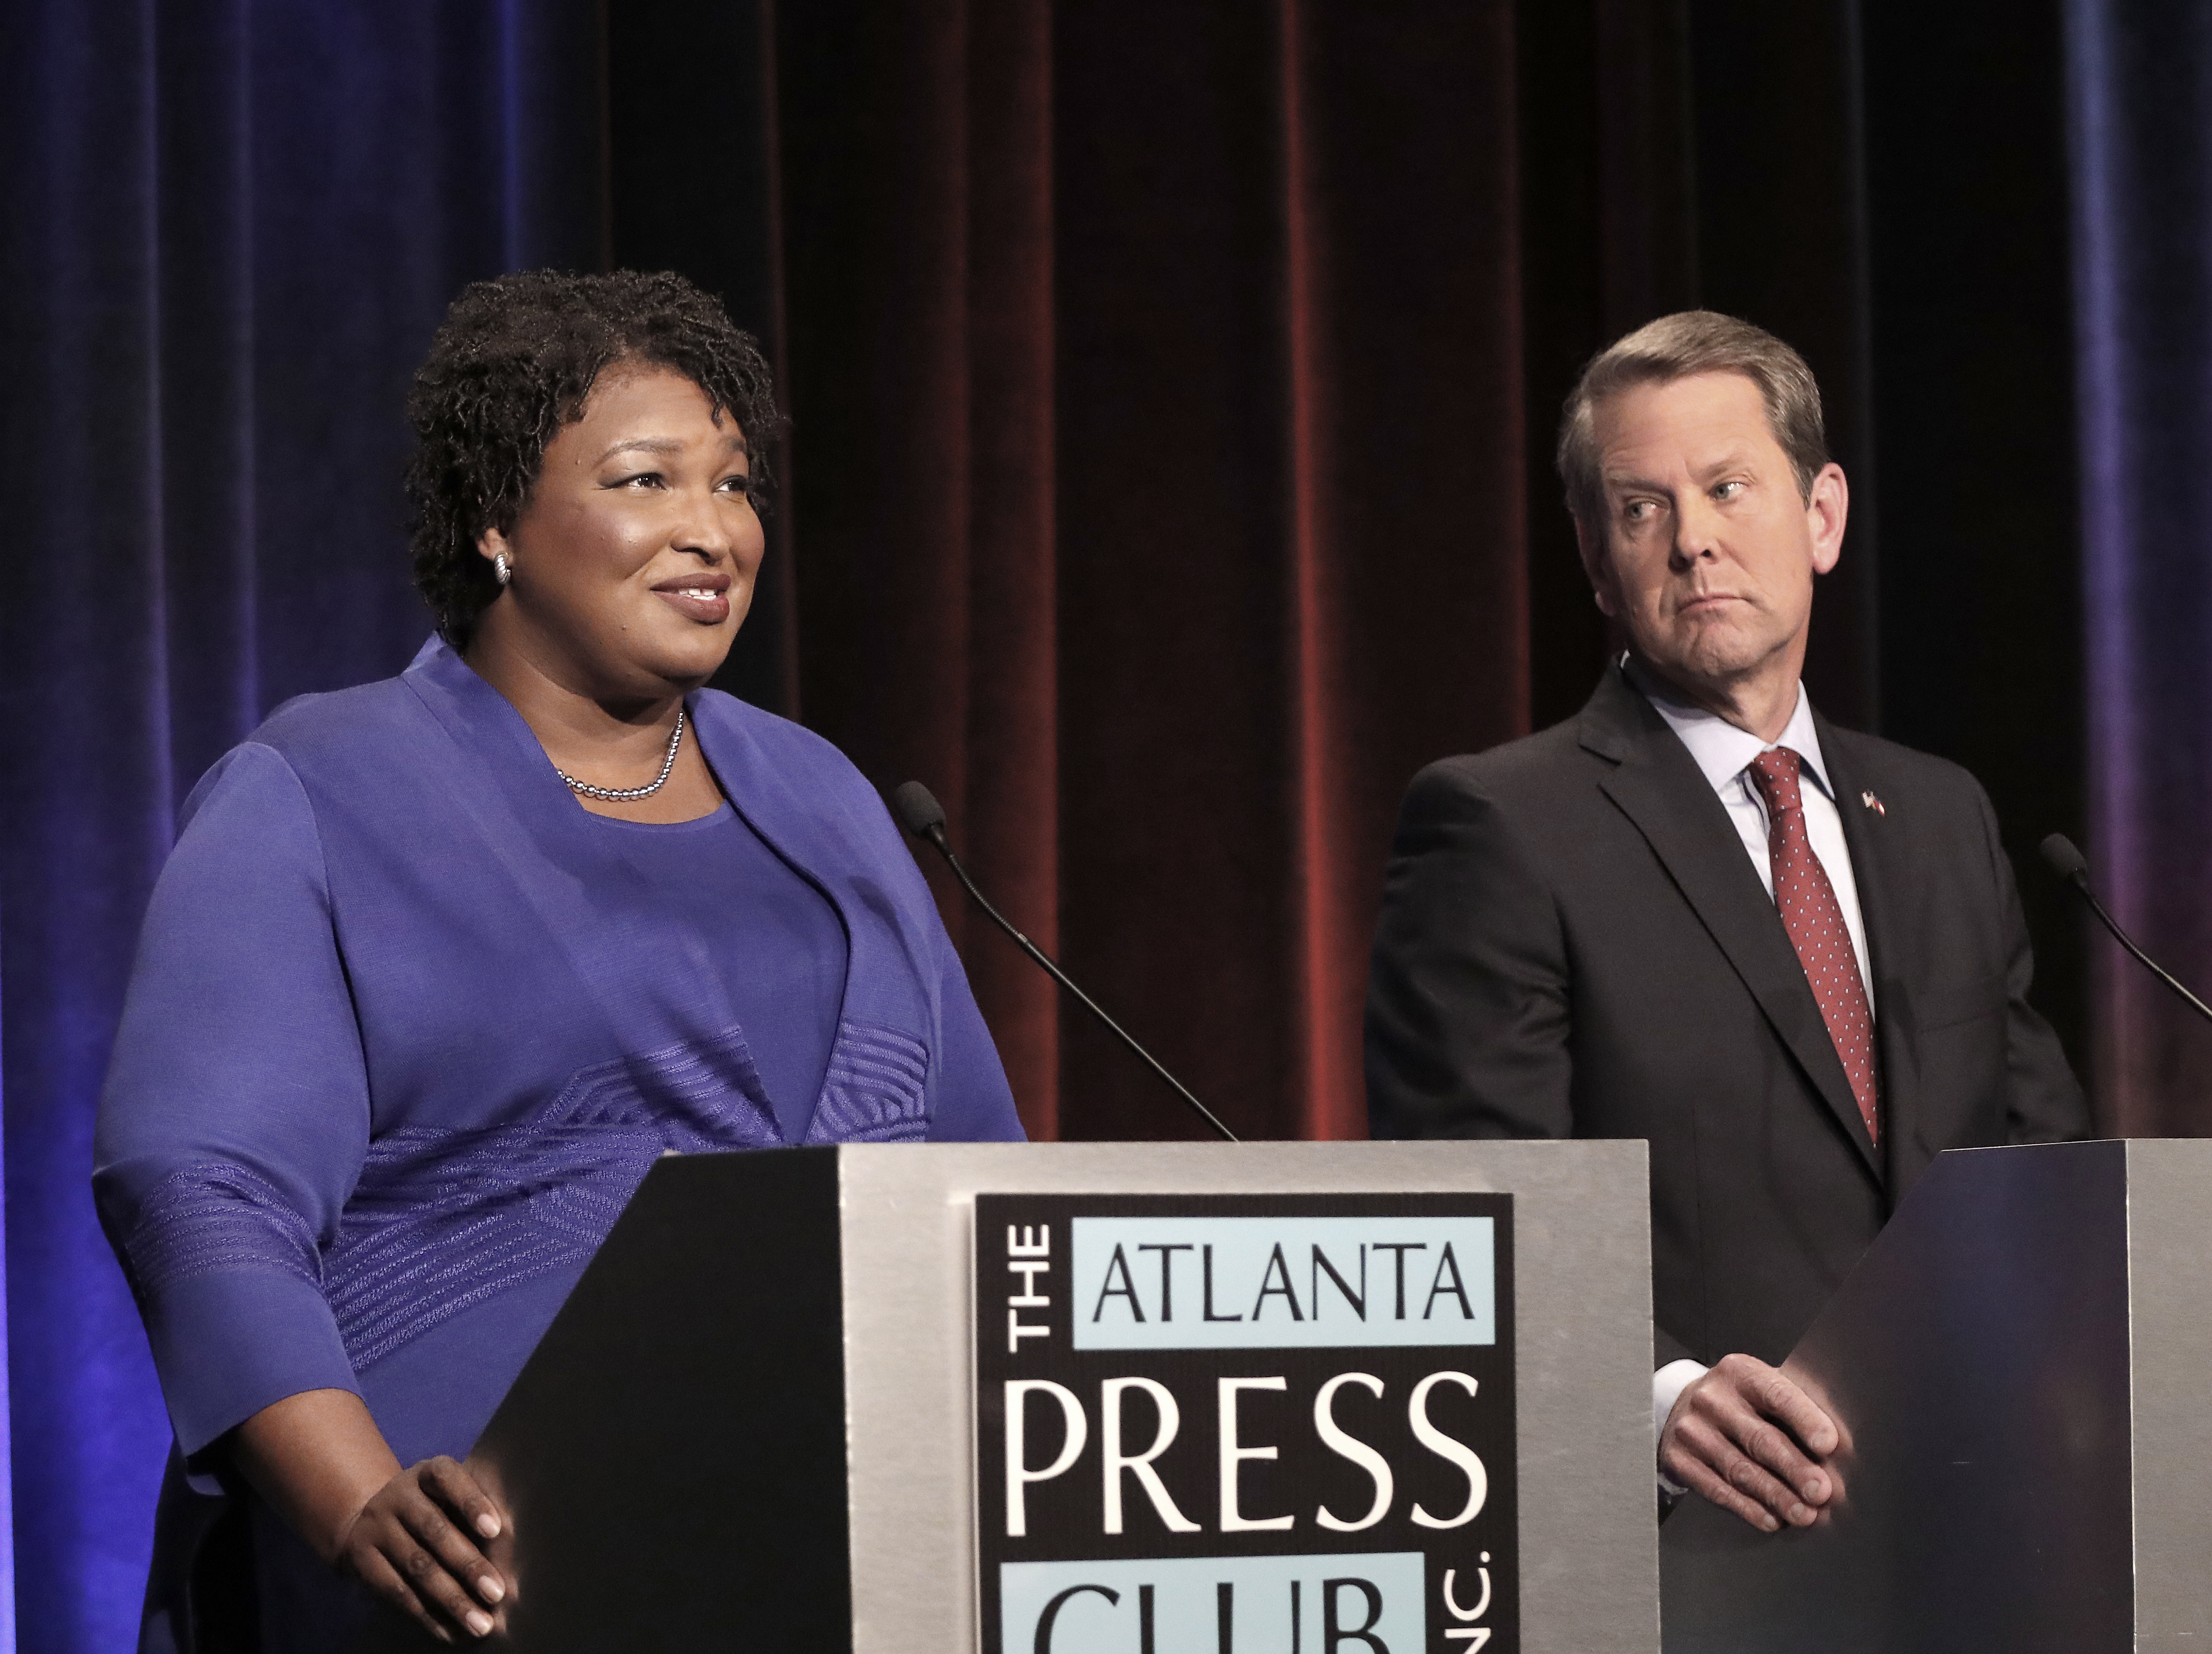 The Georgia gubernatorial contest between Democrat Stacey Abrams and Republican Brian Kemp sparked allegations of voter suppression. Now the House Oversight Committee investigating.